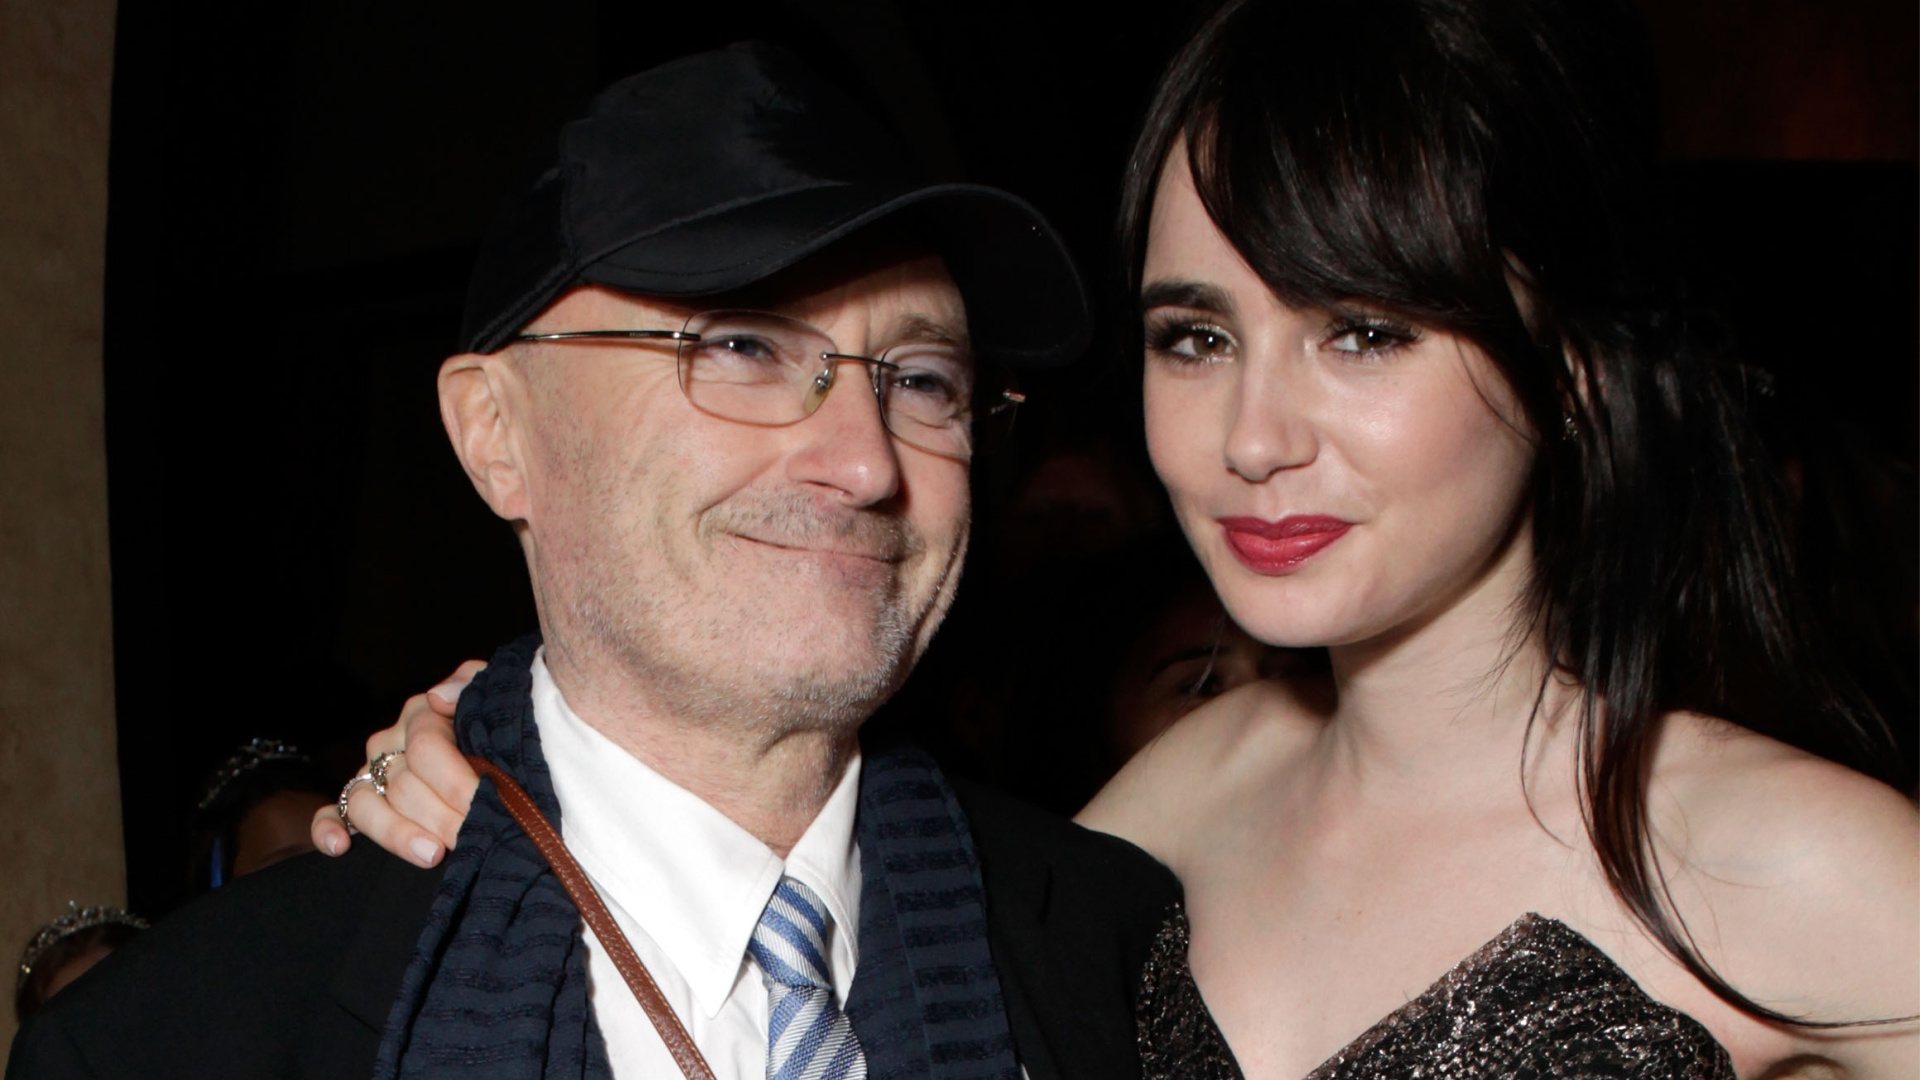 <p>And while Phil, now well into his 70s, is living out his sunset years, his daughter Lily Collins is becoming incredibly successful. Although she's an actress, she is certainly carrying the torch of fame.</p> <p><a href="https://www.msn.com/en-us/channel/source/Showbizz%20Daily%20English/sr-vid-w8hcuhvu3f8qr5wn5rk8xhsu5x8irqrgtxcypg4uxvn7tq9vkkfa?cvid=cddbc5c4fc9748a196a59c4cb5f3d12a&ei=7" rel="noopener">Follow Showbizz Daily to stay informed and enjoy more content!</a></p>